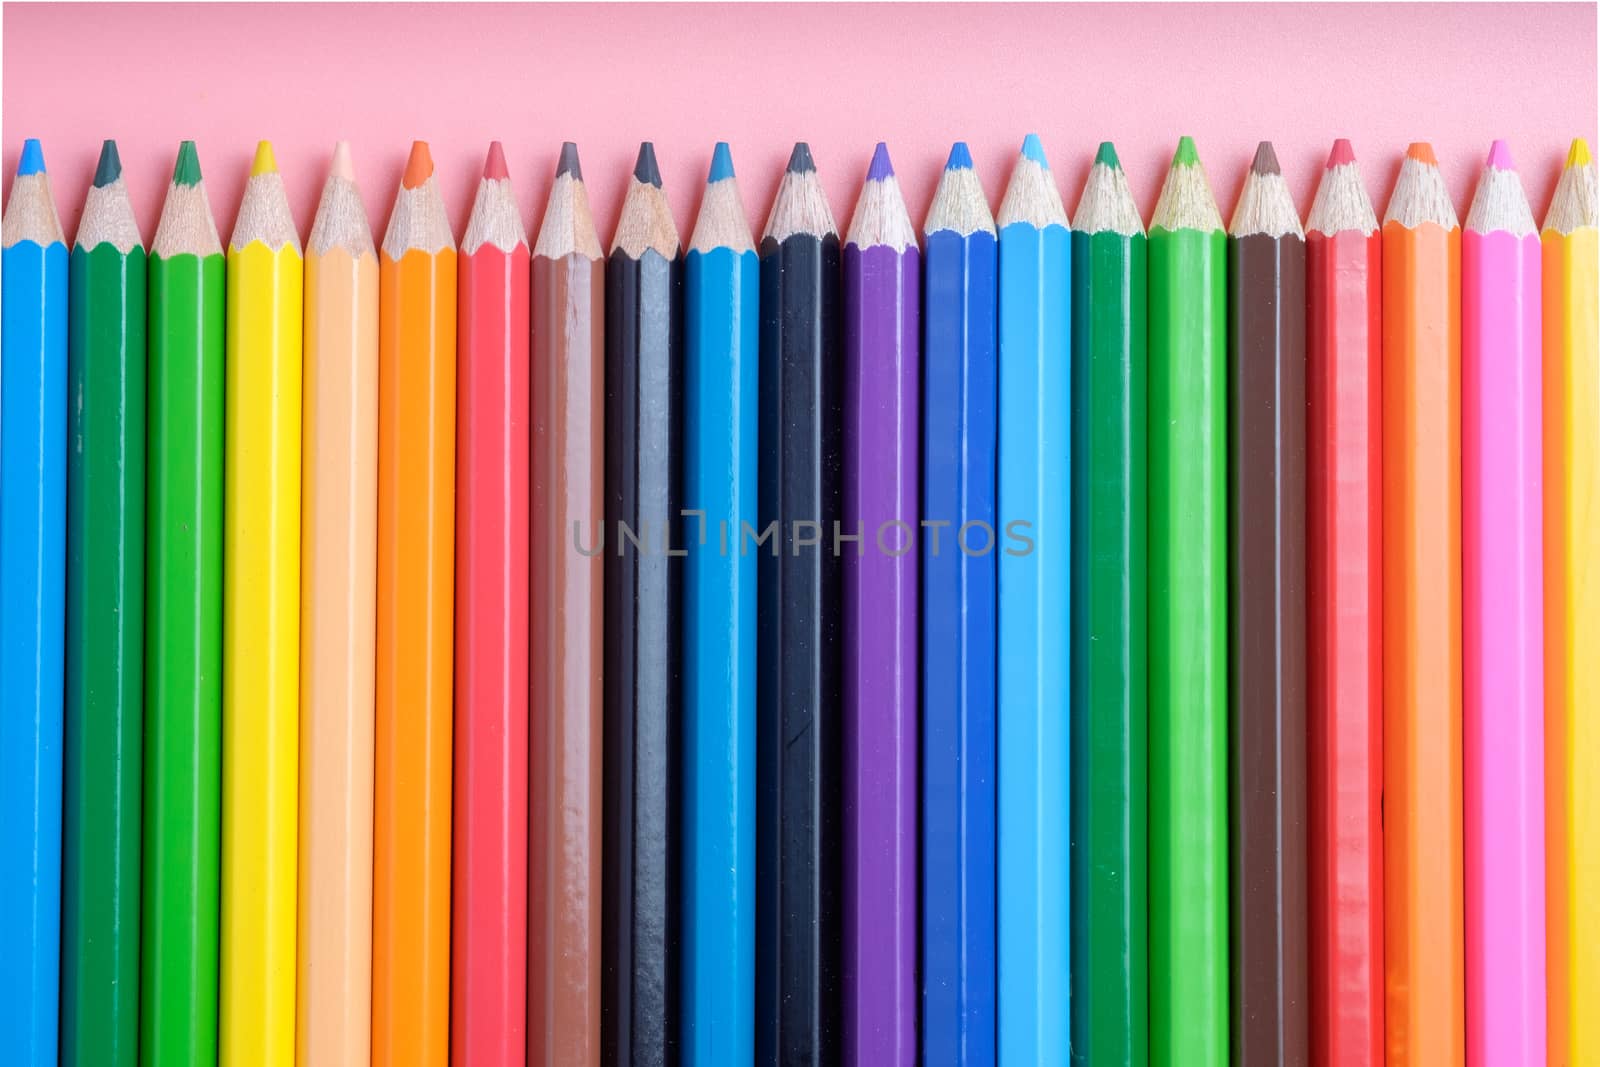 Colored pencils on pink background by zneb076